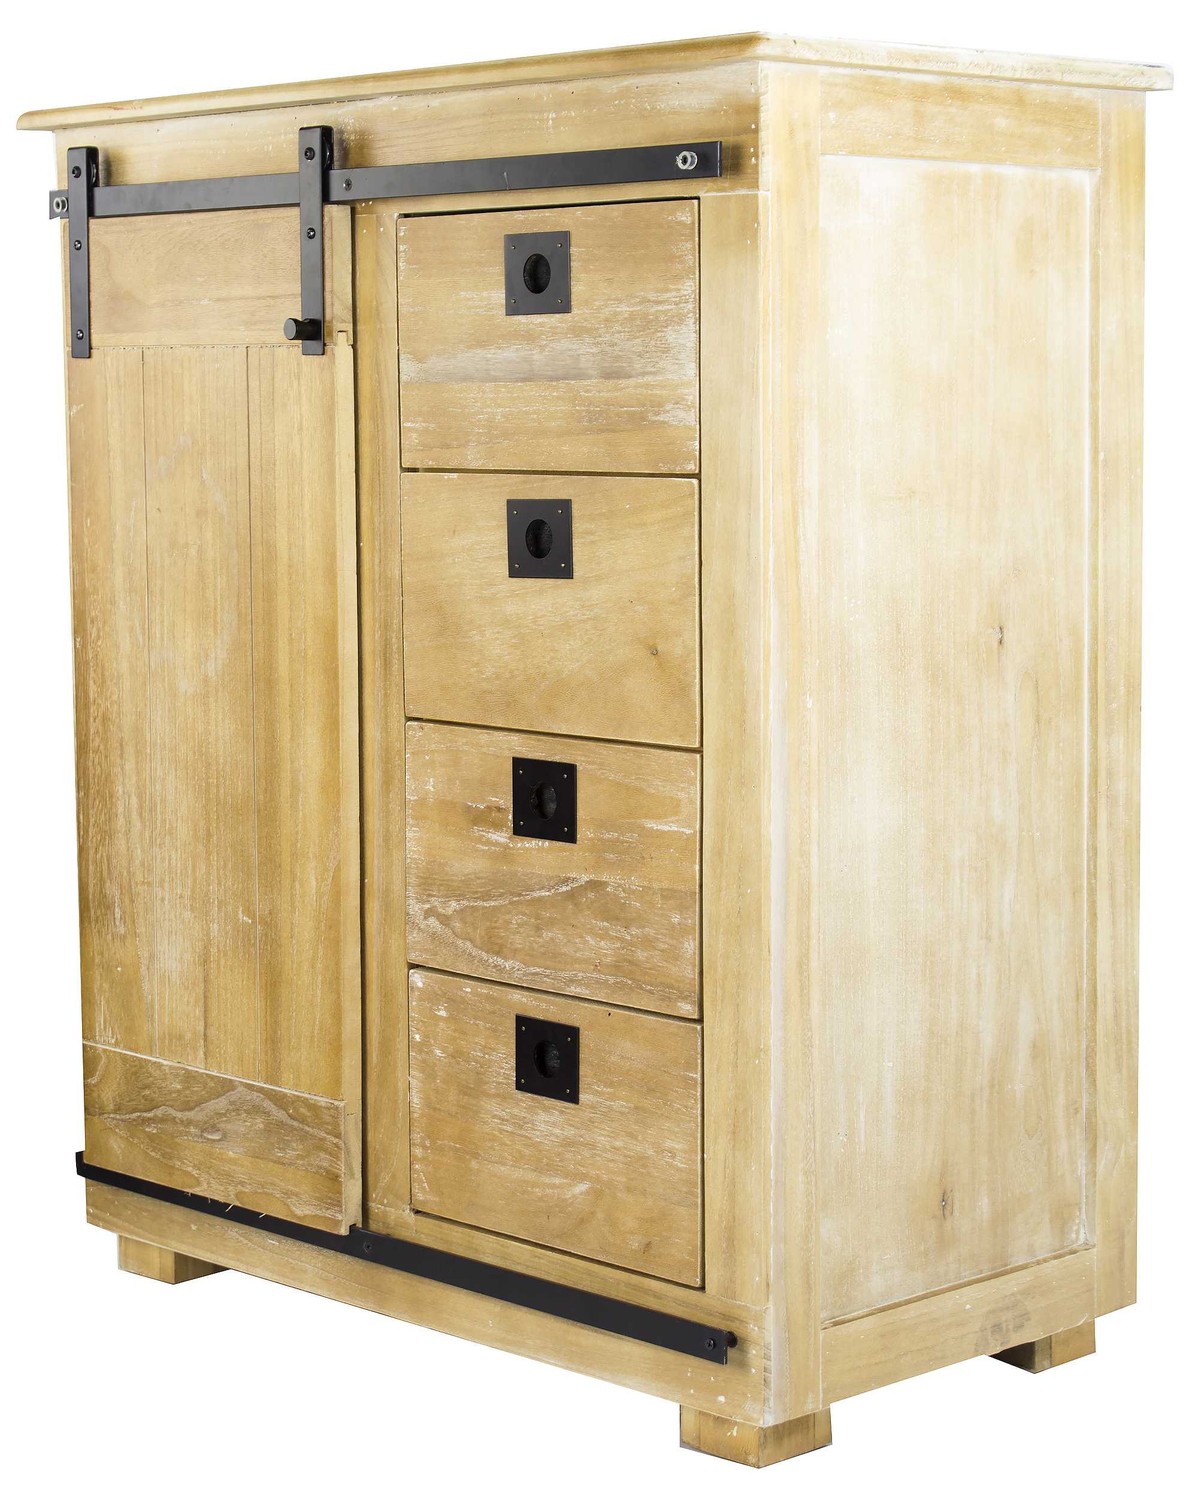 35.5" X 19" X 41.25" Rustic Wood MDF Wood Iron Accent Cabinet with a Door and Drawers